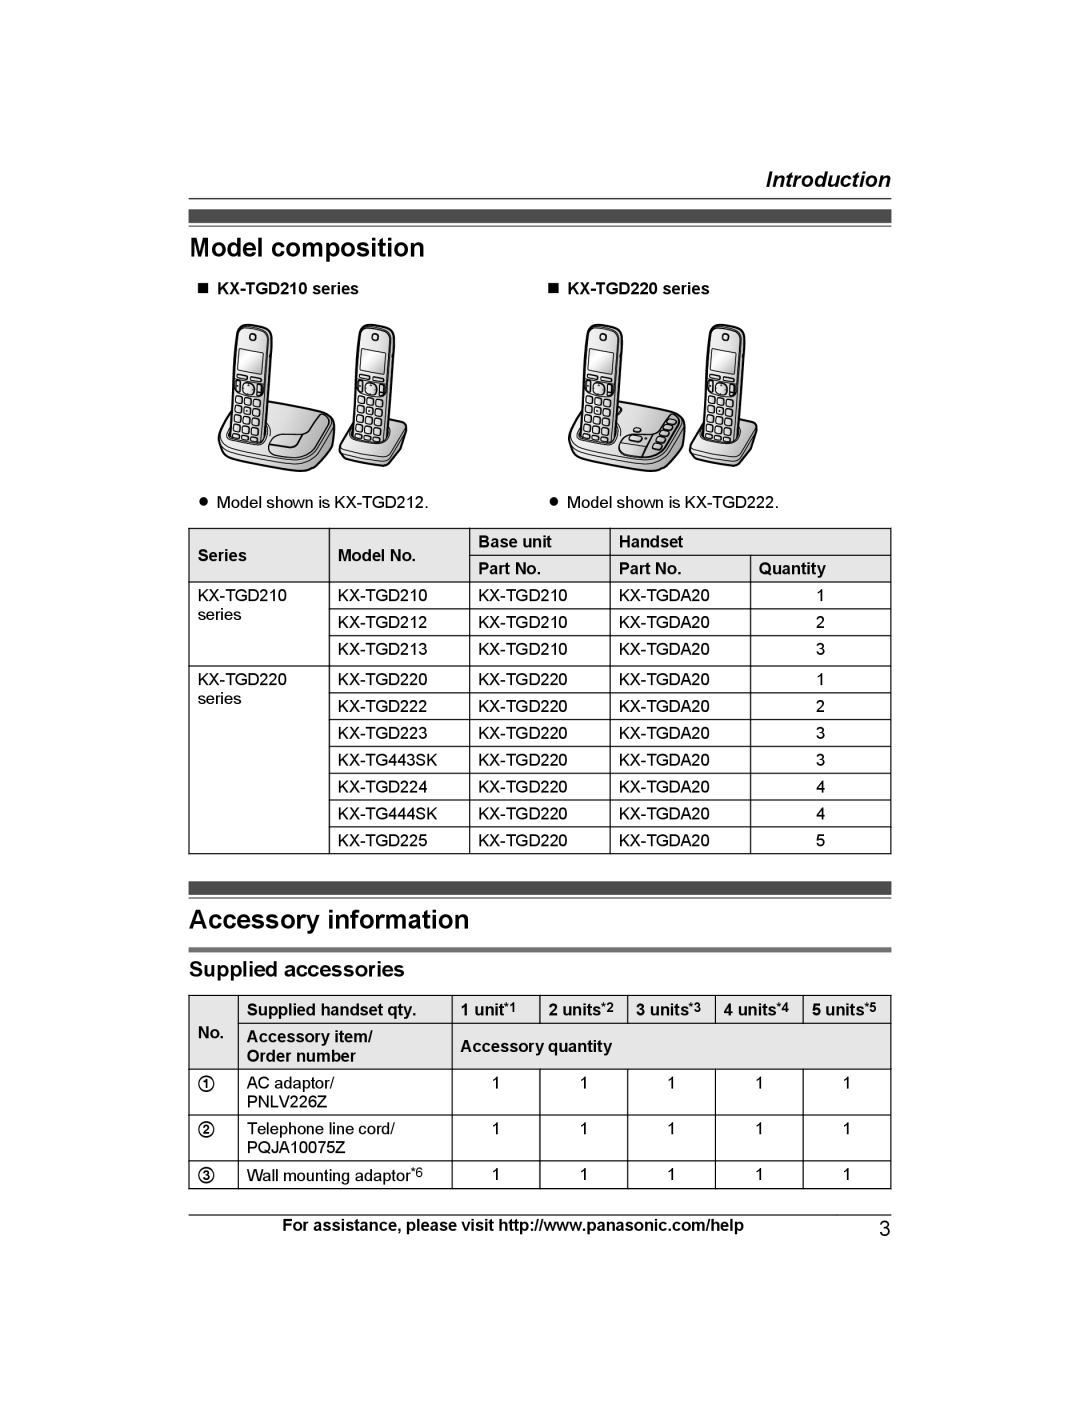 Panasonic KX-TGD222 Model composition, Accessory information, Introduction, Supplied accessories, n KX-TGD210 series 